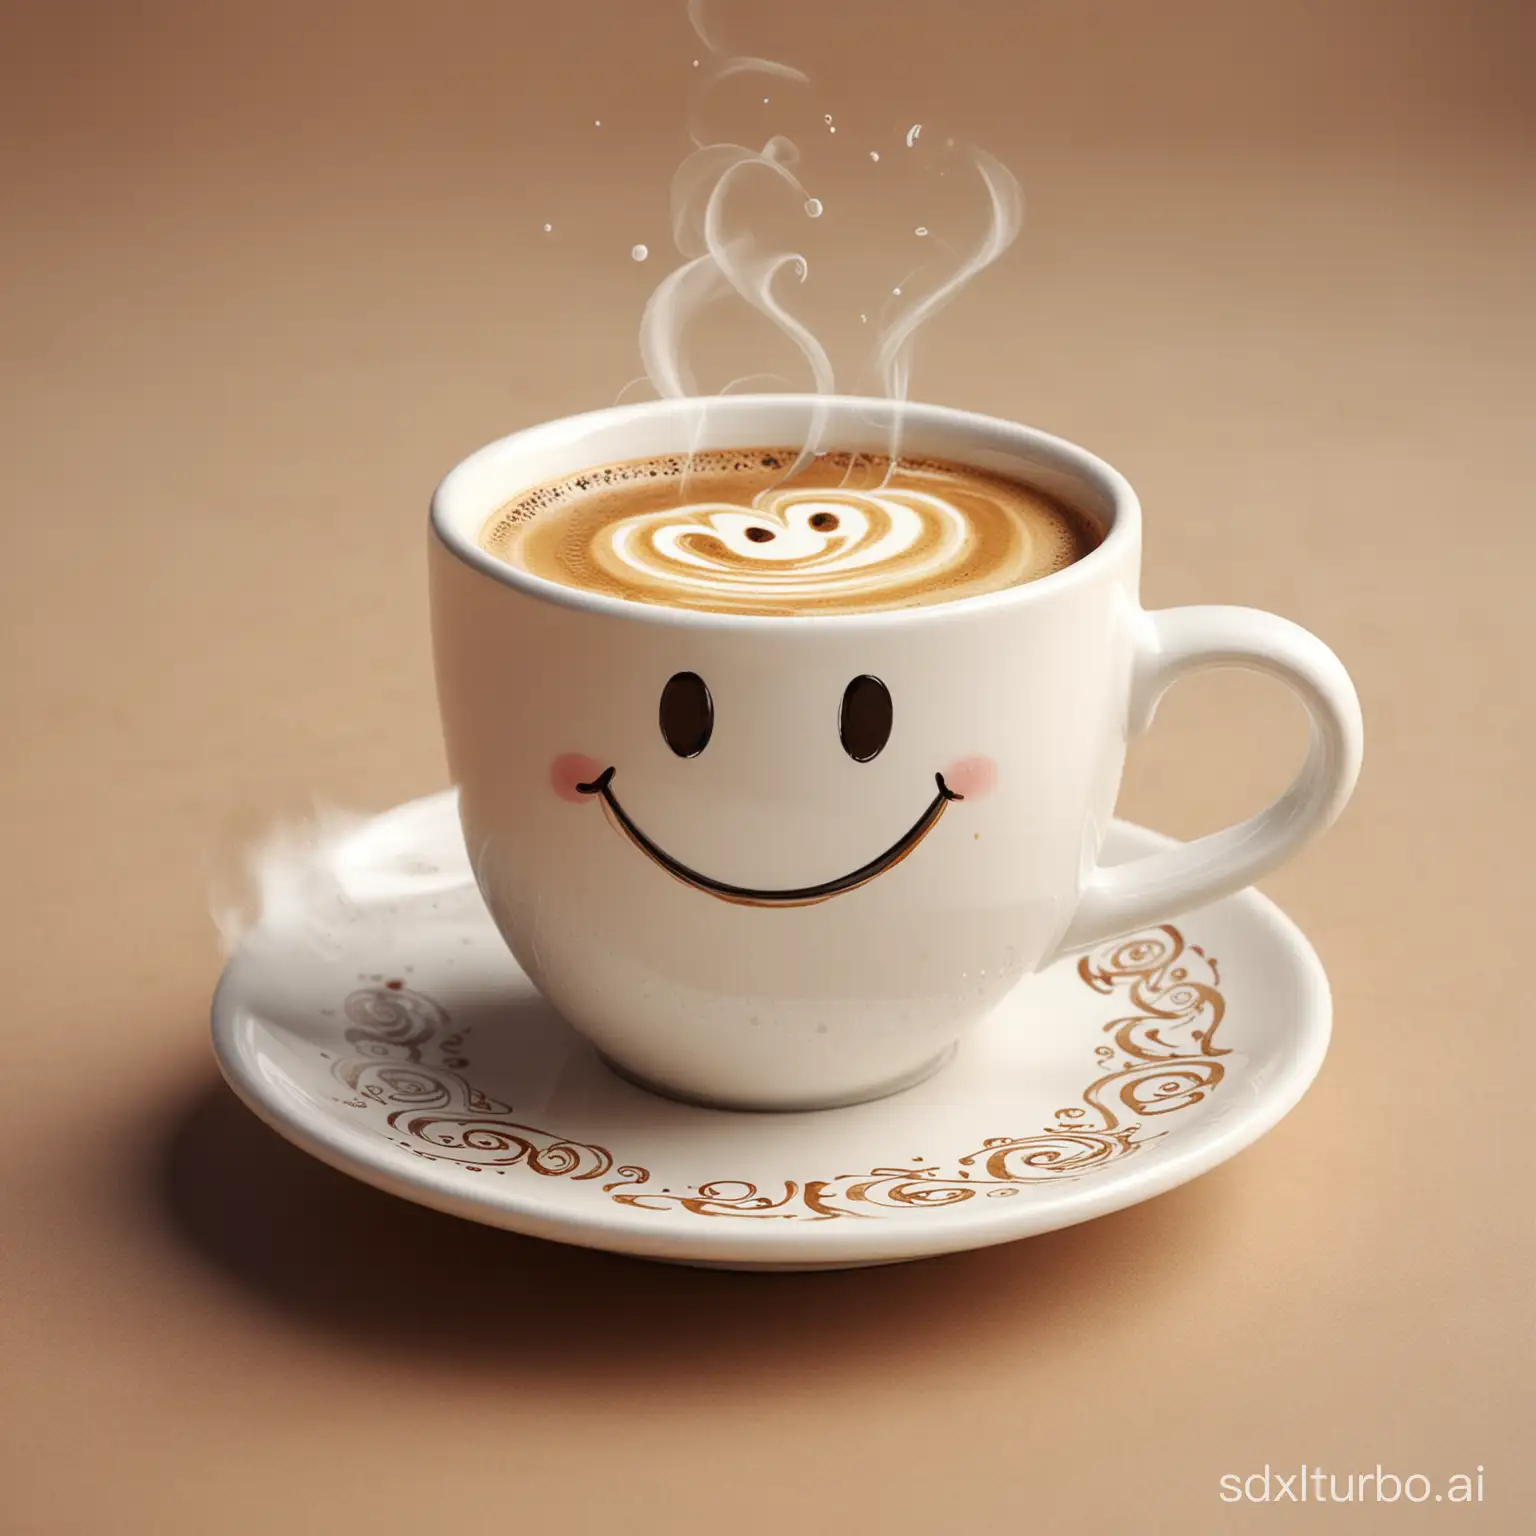 A delightful, whimsical illustration of a classic coffee cup, personified with a happy, smiley face. The cup's face is adorned with shiny white teeth, giving a sense of joy and cheerfulness. The cup is supported by a saucer, which has a playful design of swirls and lines. The background is a warm and cozy café, with white steam up, with text "Zhang Jing" on the cup, 3D effect.